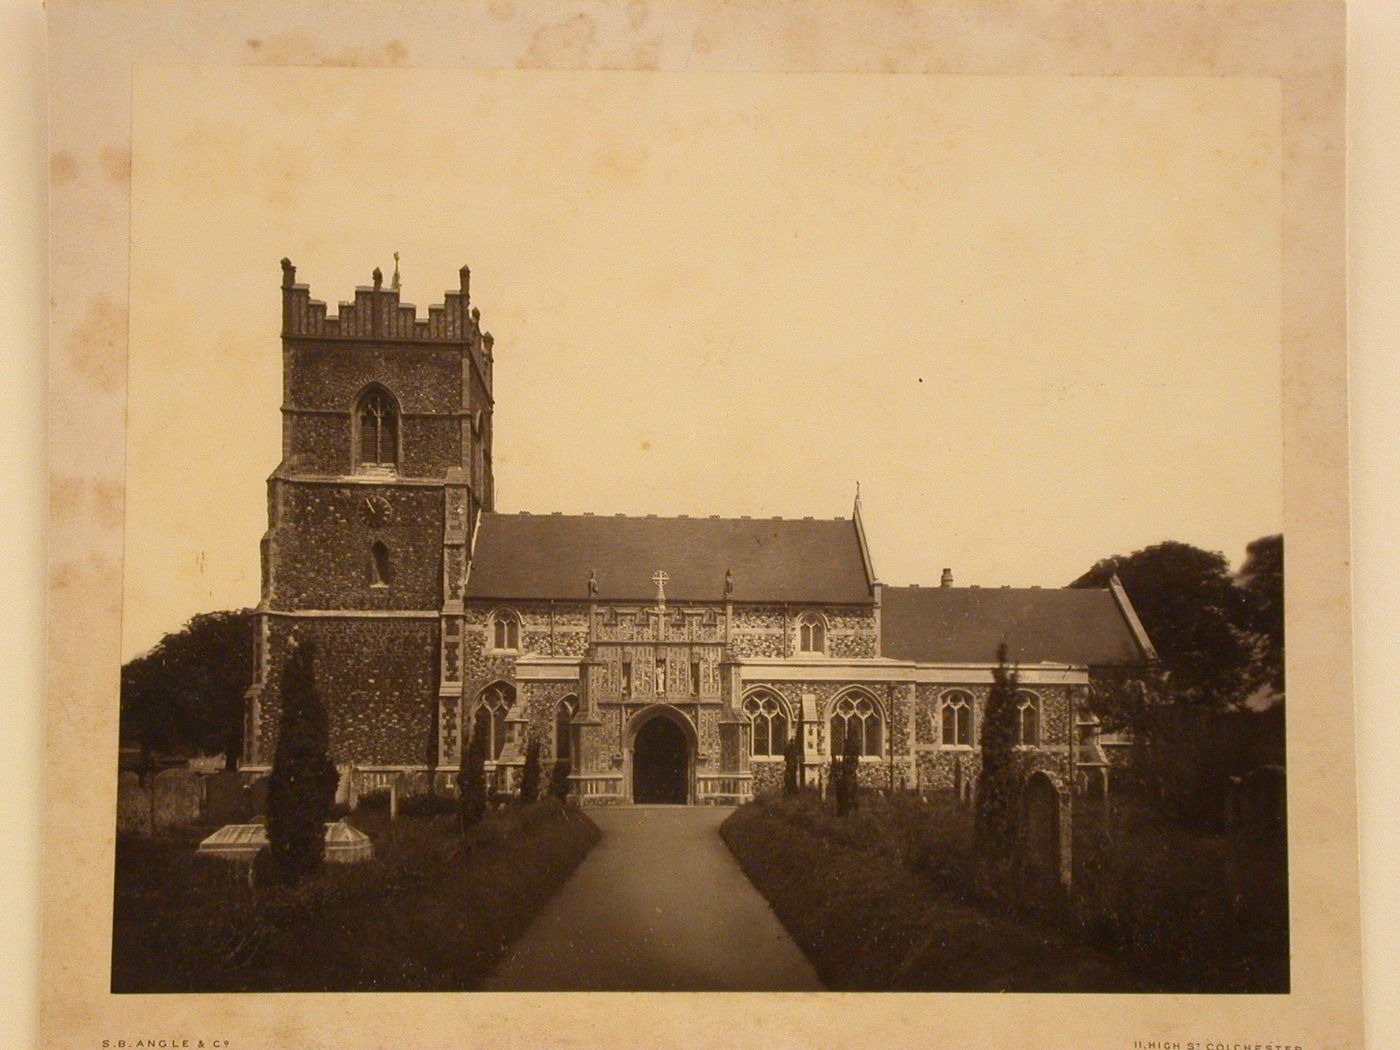 View of the Church of St. Mary the Virgin, Ardleigh, Essex, England